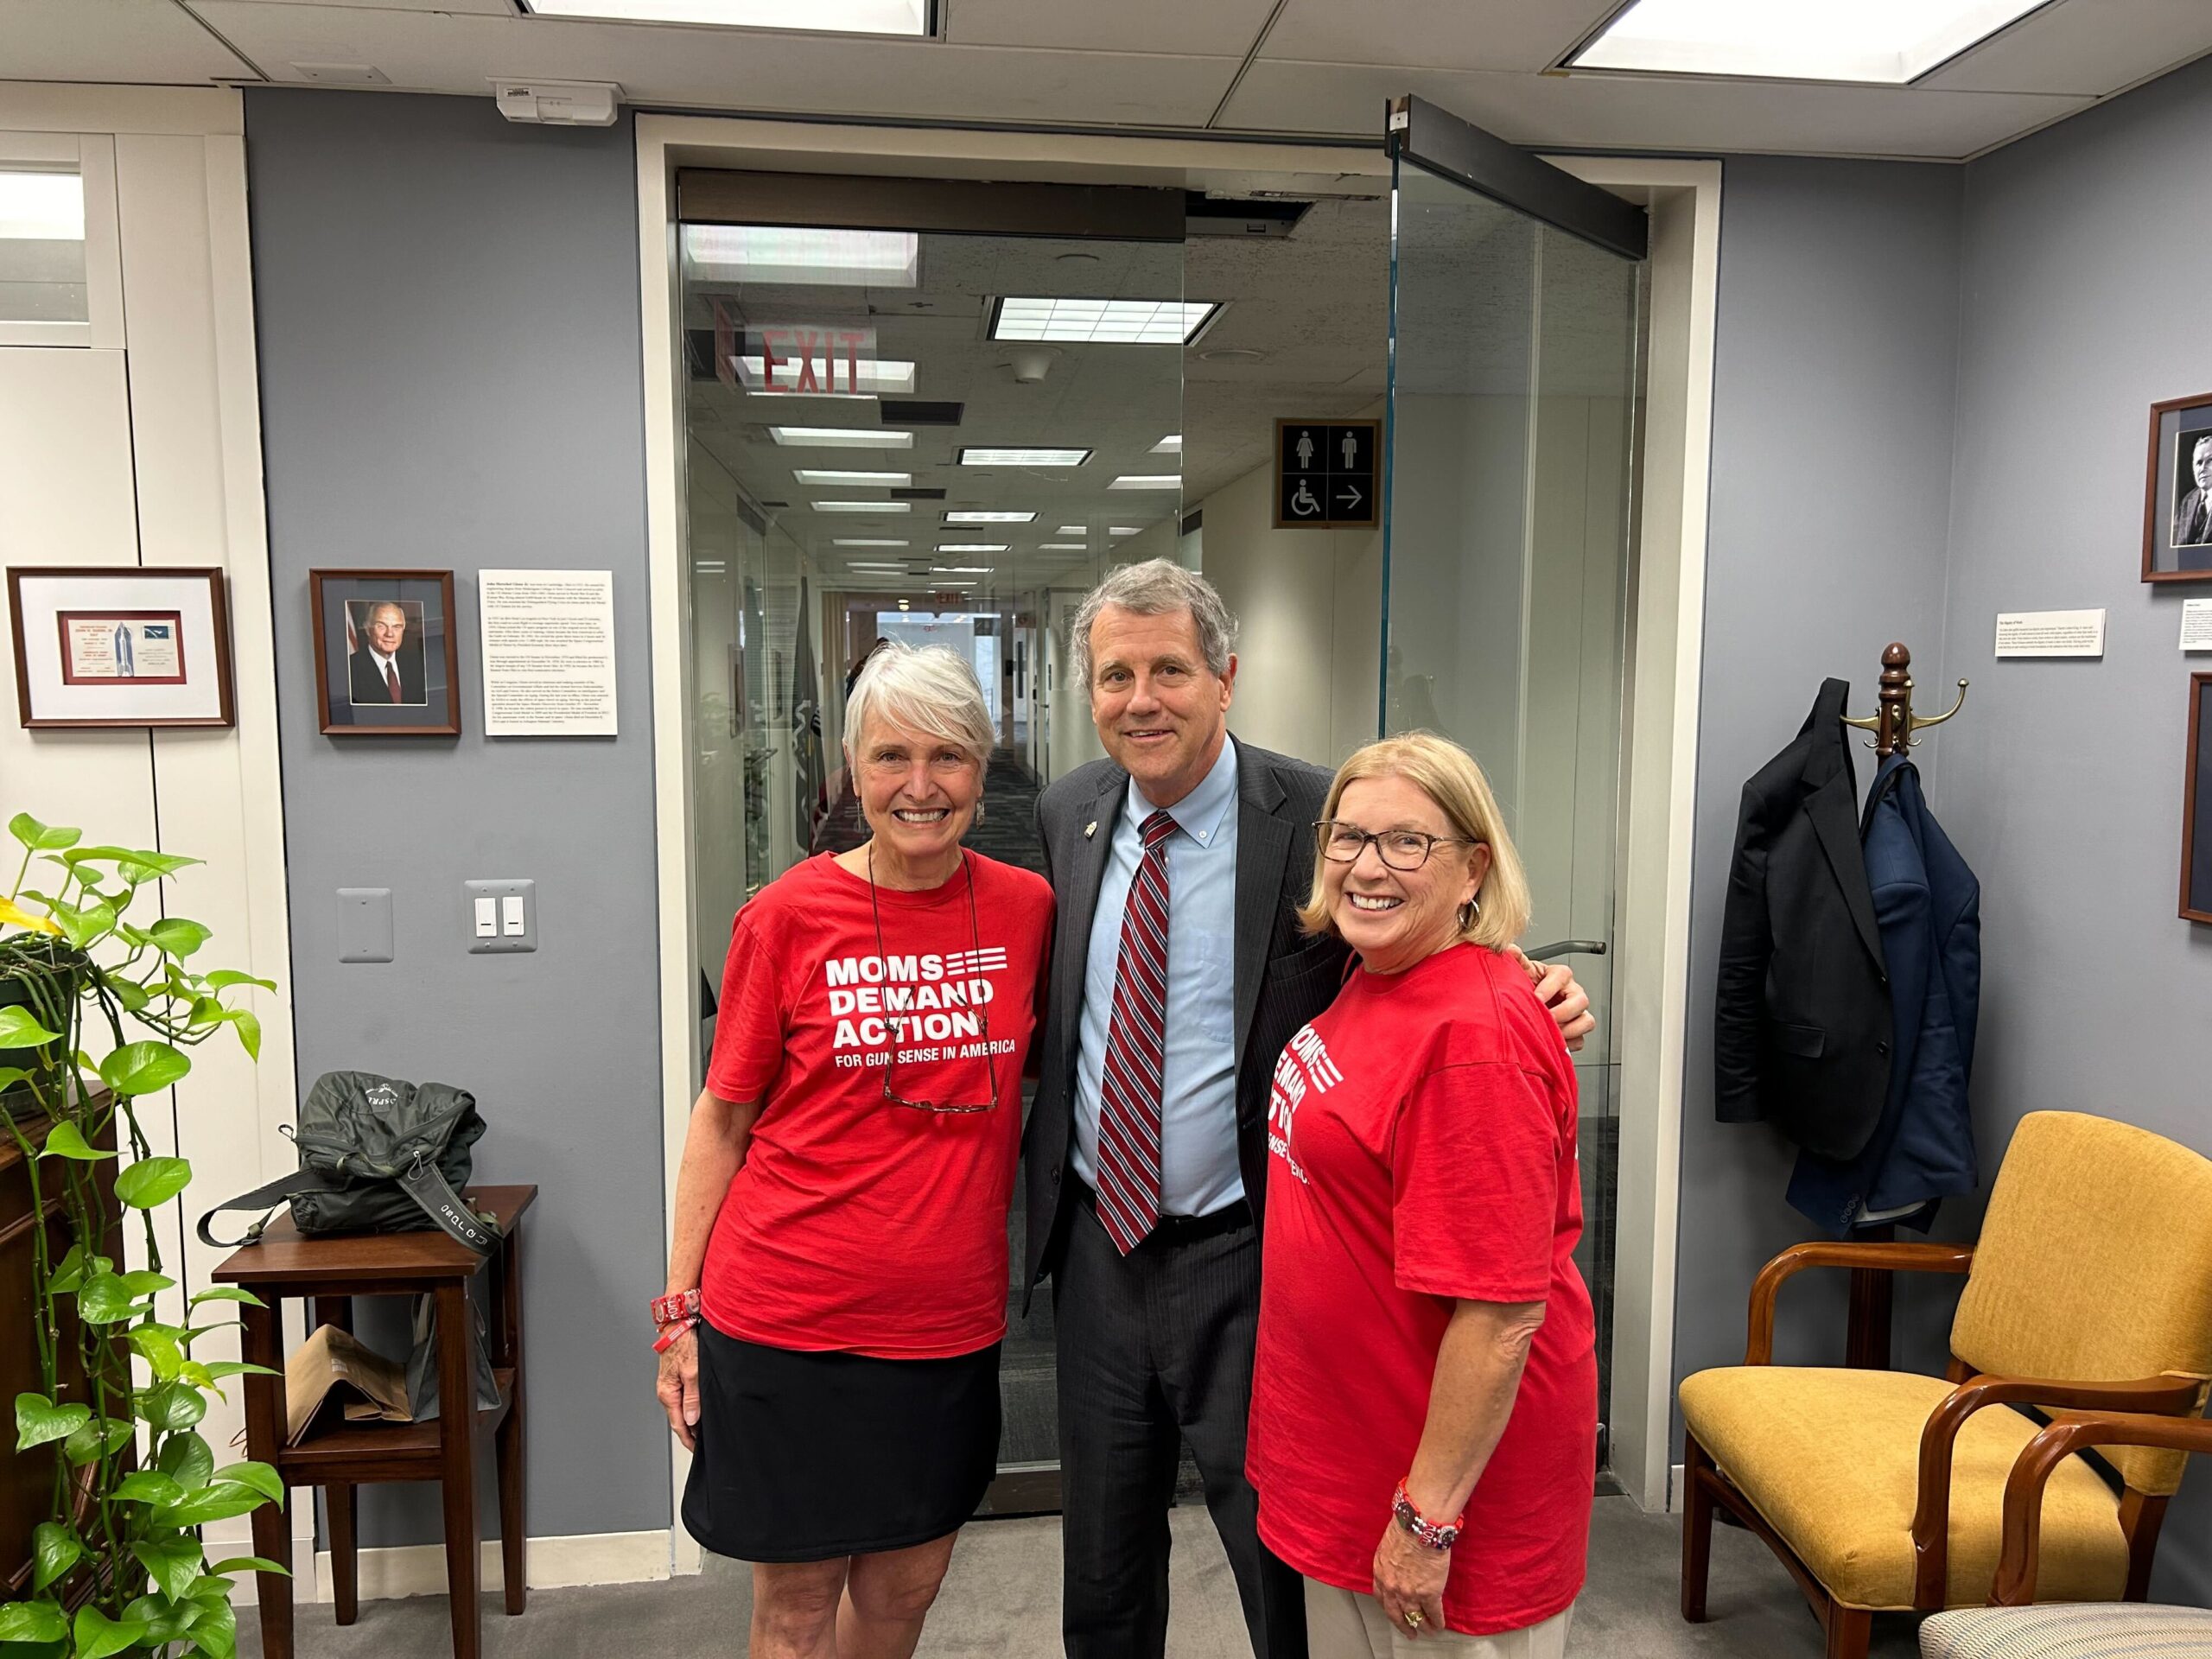 Two volunteers from Ohio pose for a photo with Rep. Sherrod Brown. Both the volunteers wear red Moms Demand Action tees; Rep Brown stands between them. He wears a dark suit jacket, a light blue collared shirt, and a red and blue striped tie.